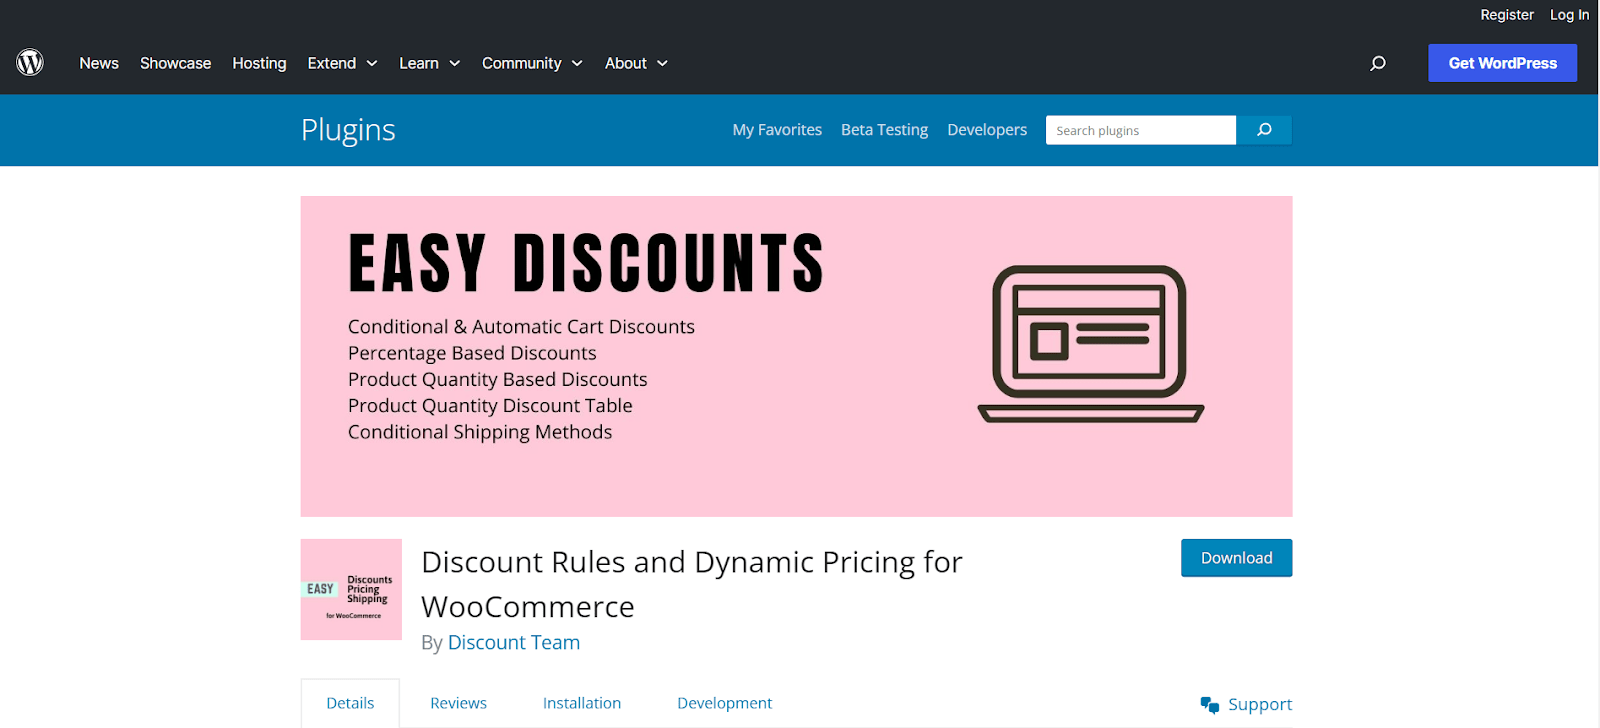 Discount Rules and Dynamic Pricing for WooCommerce plugin